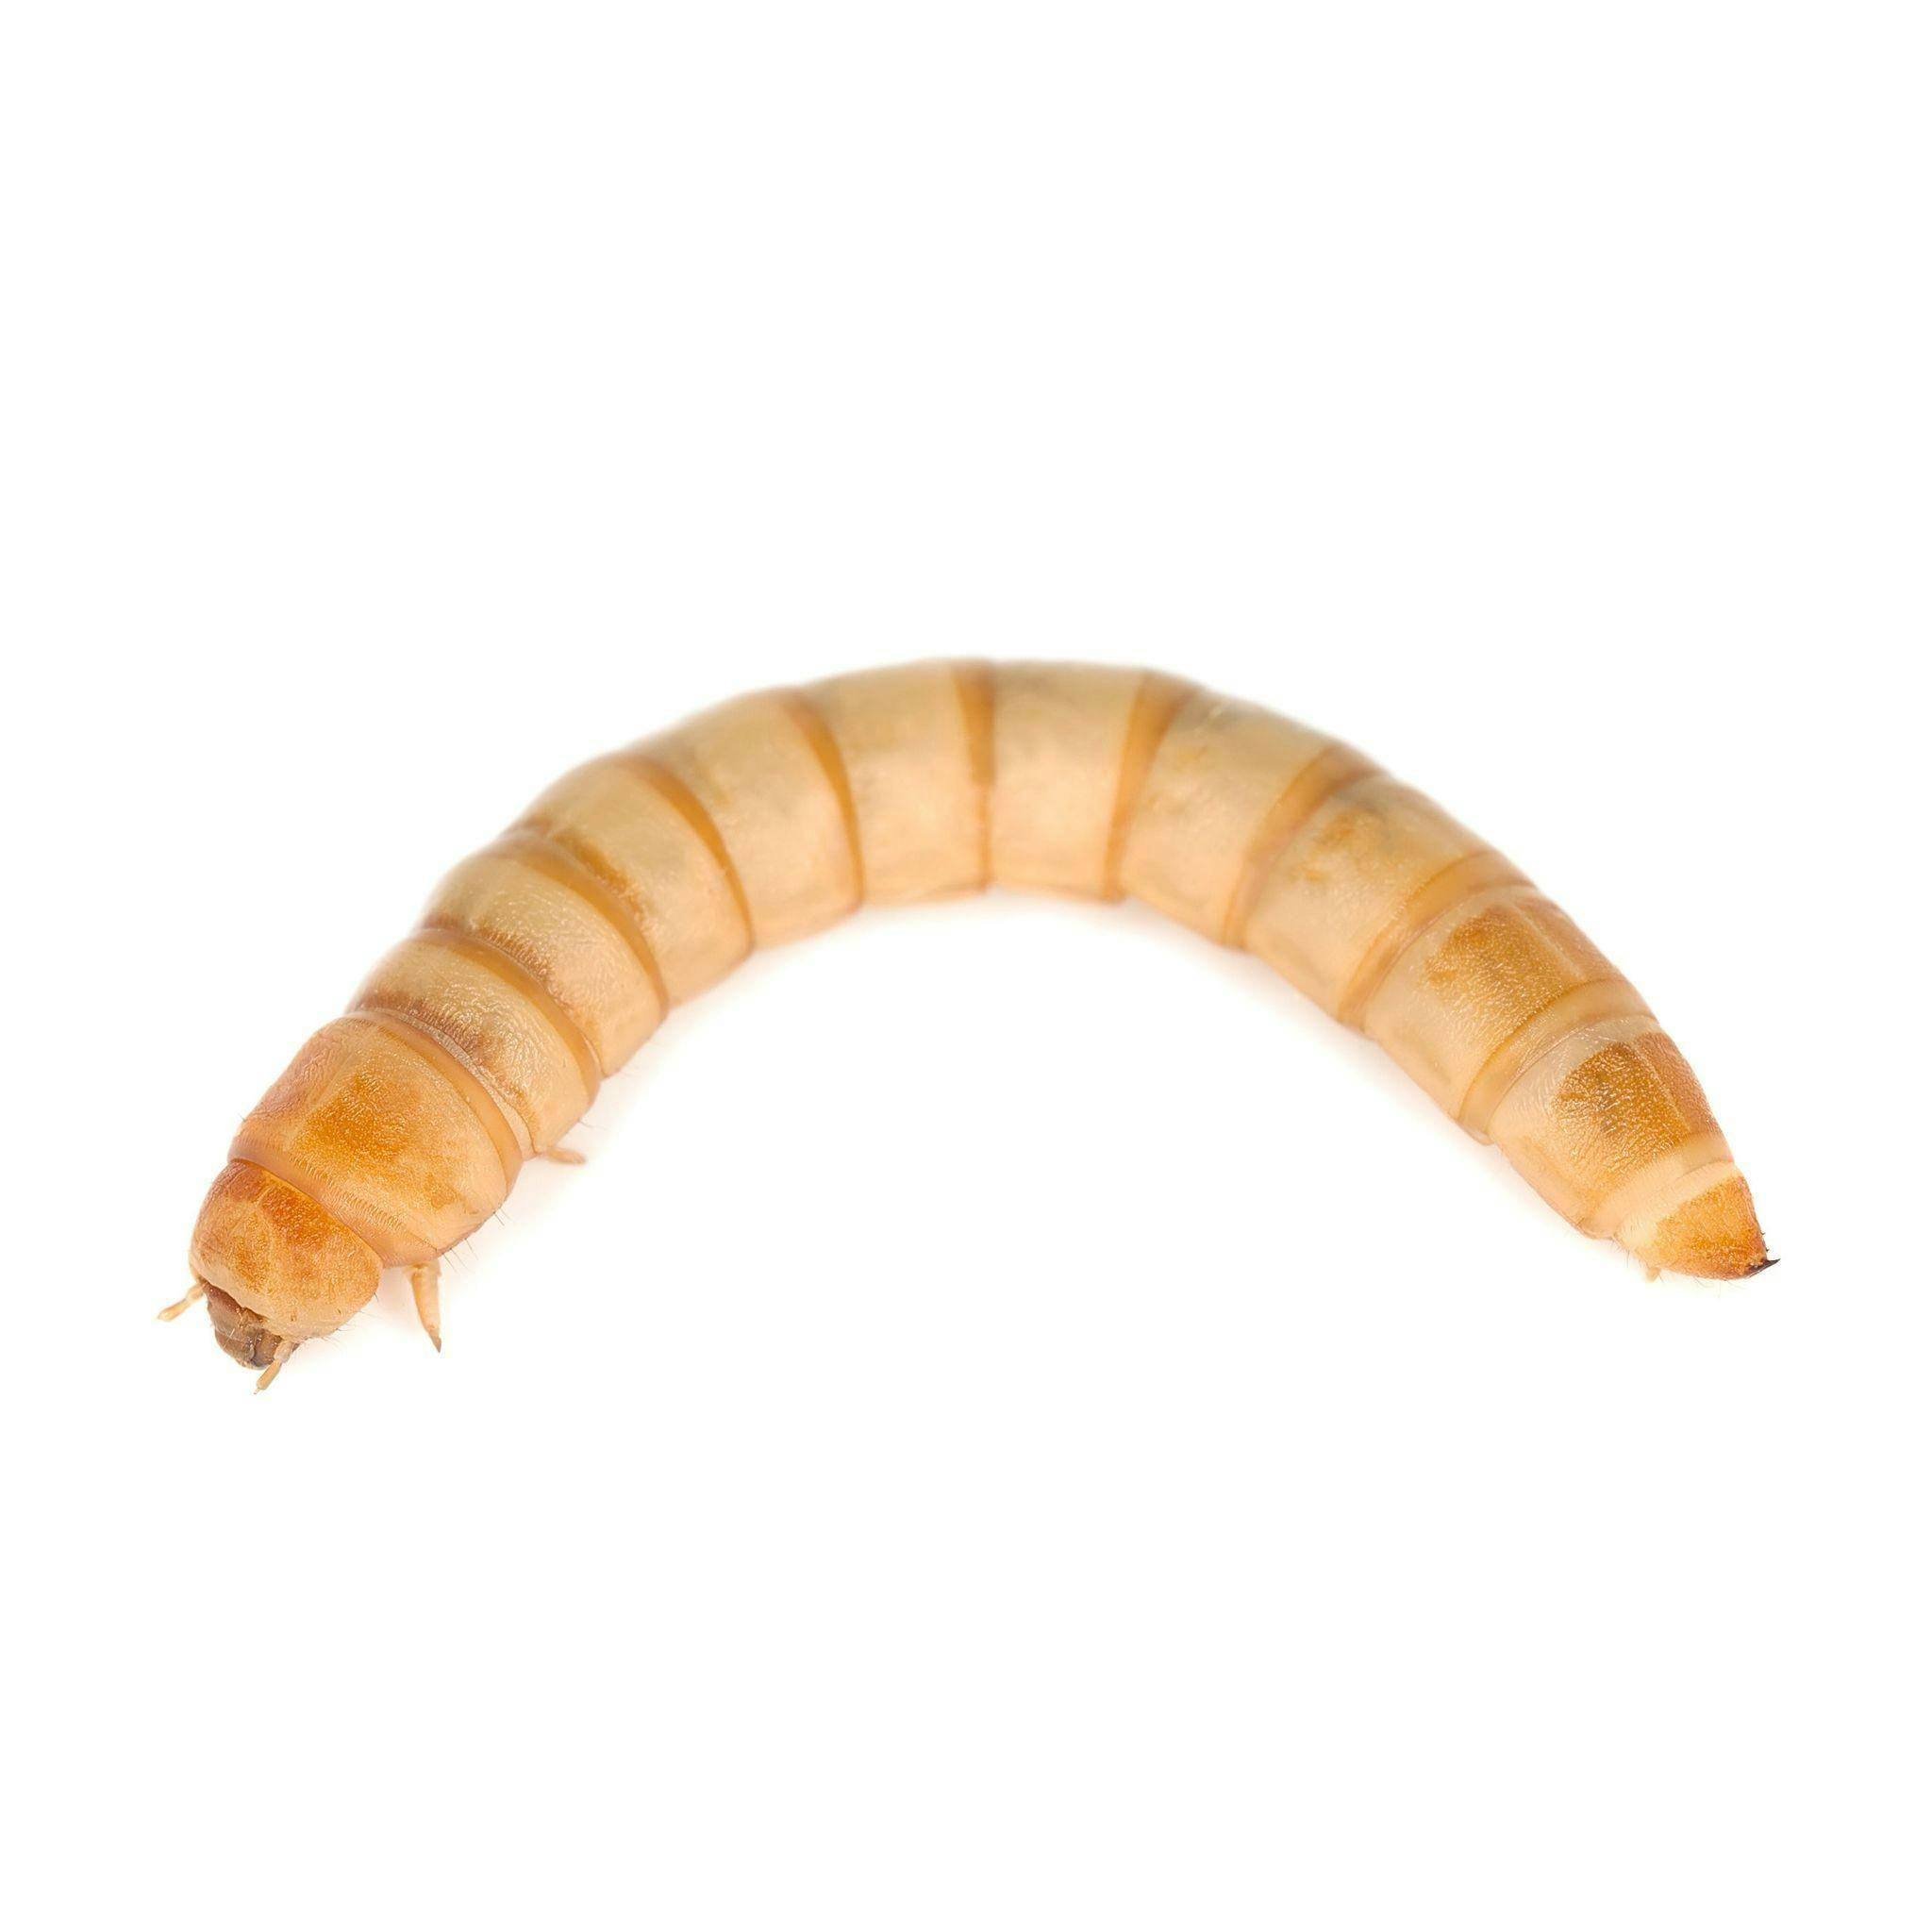 Image for Live Mealworms (500) by The Bug Factory